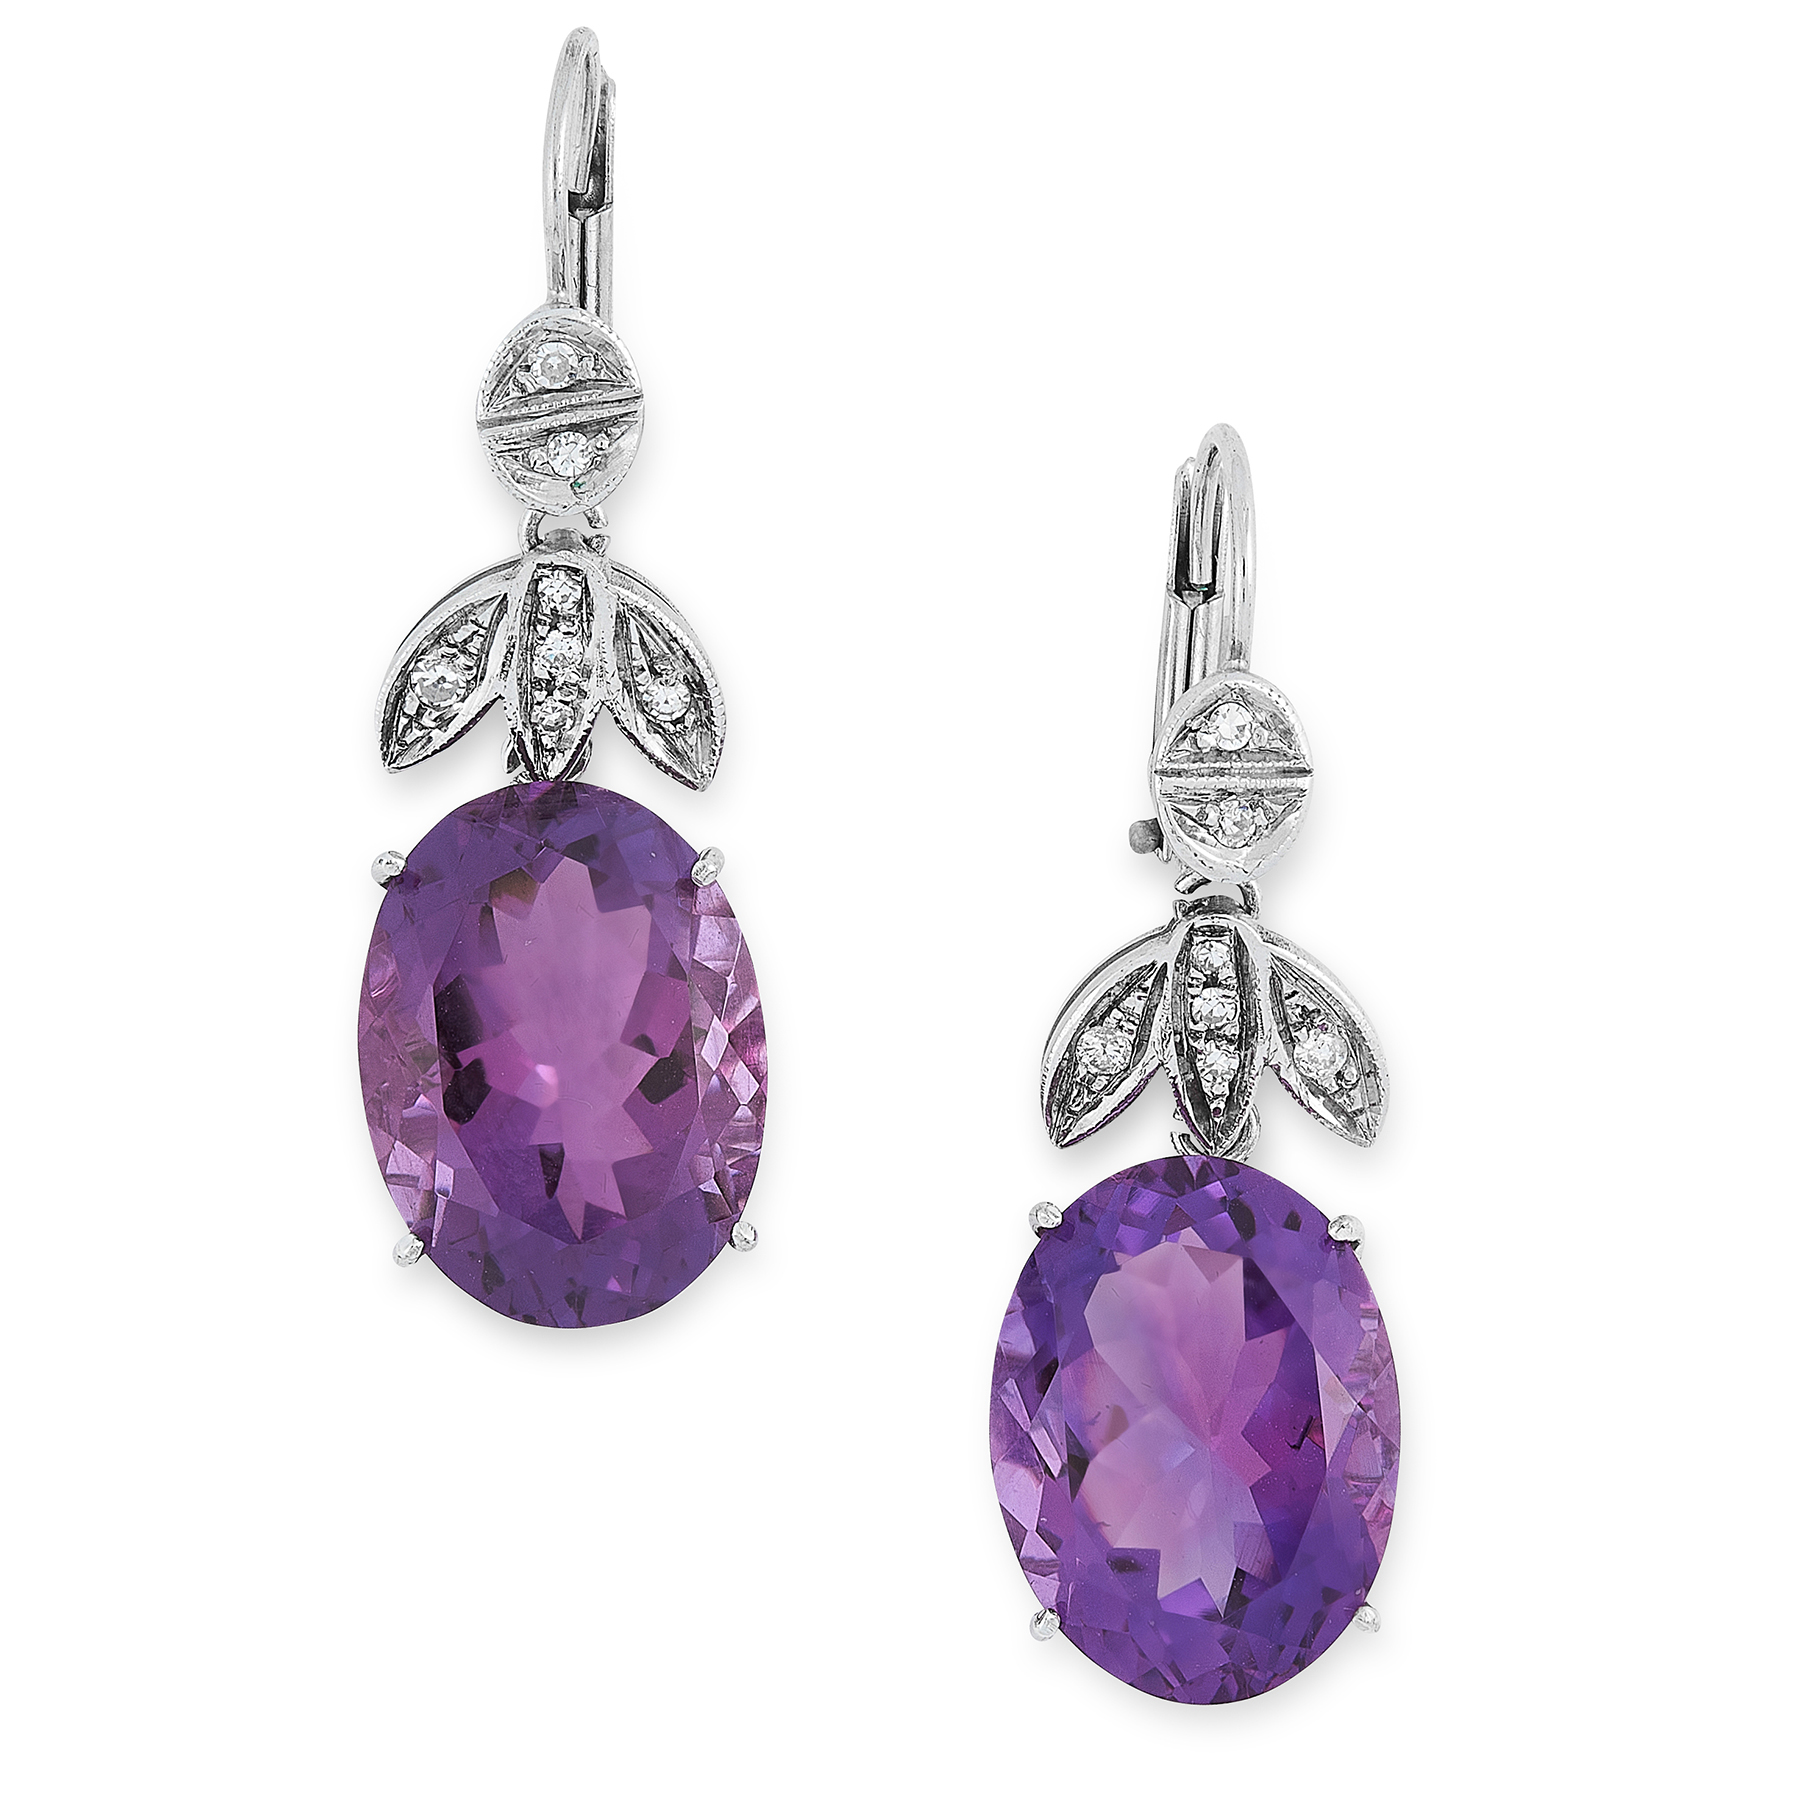 A PAIR OF AMETHYST AND DIAMOND EARRINGS in 18ct white gold, each set with an oval cut amethyst of